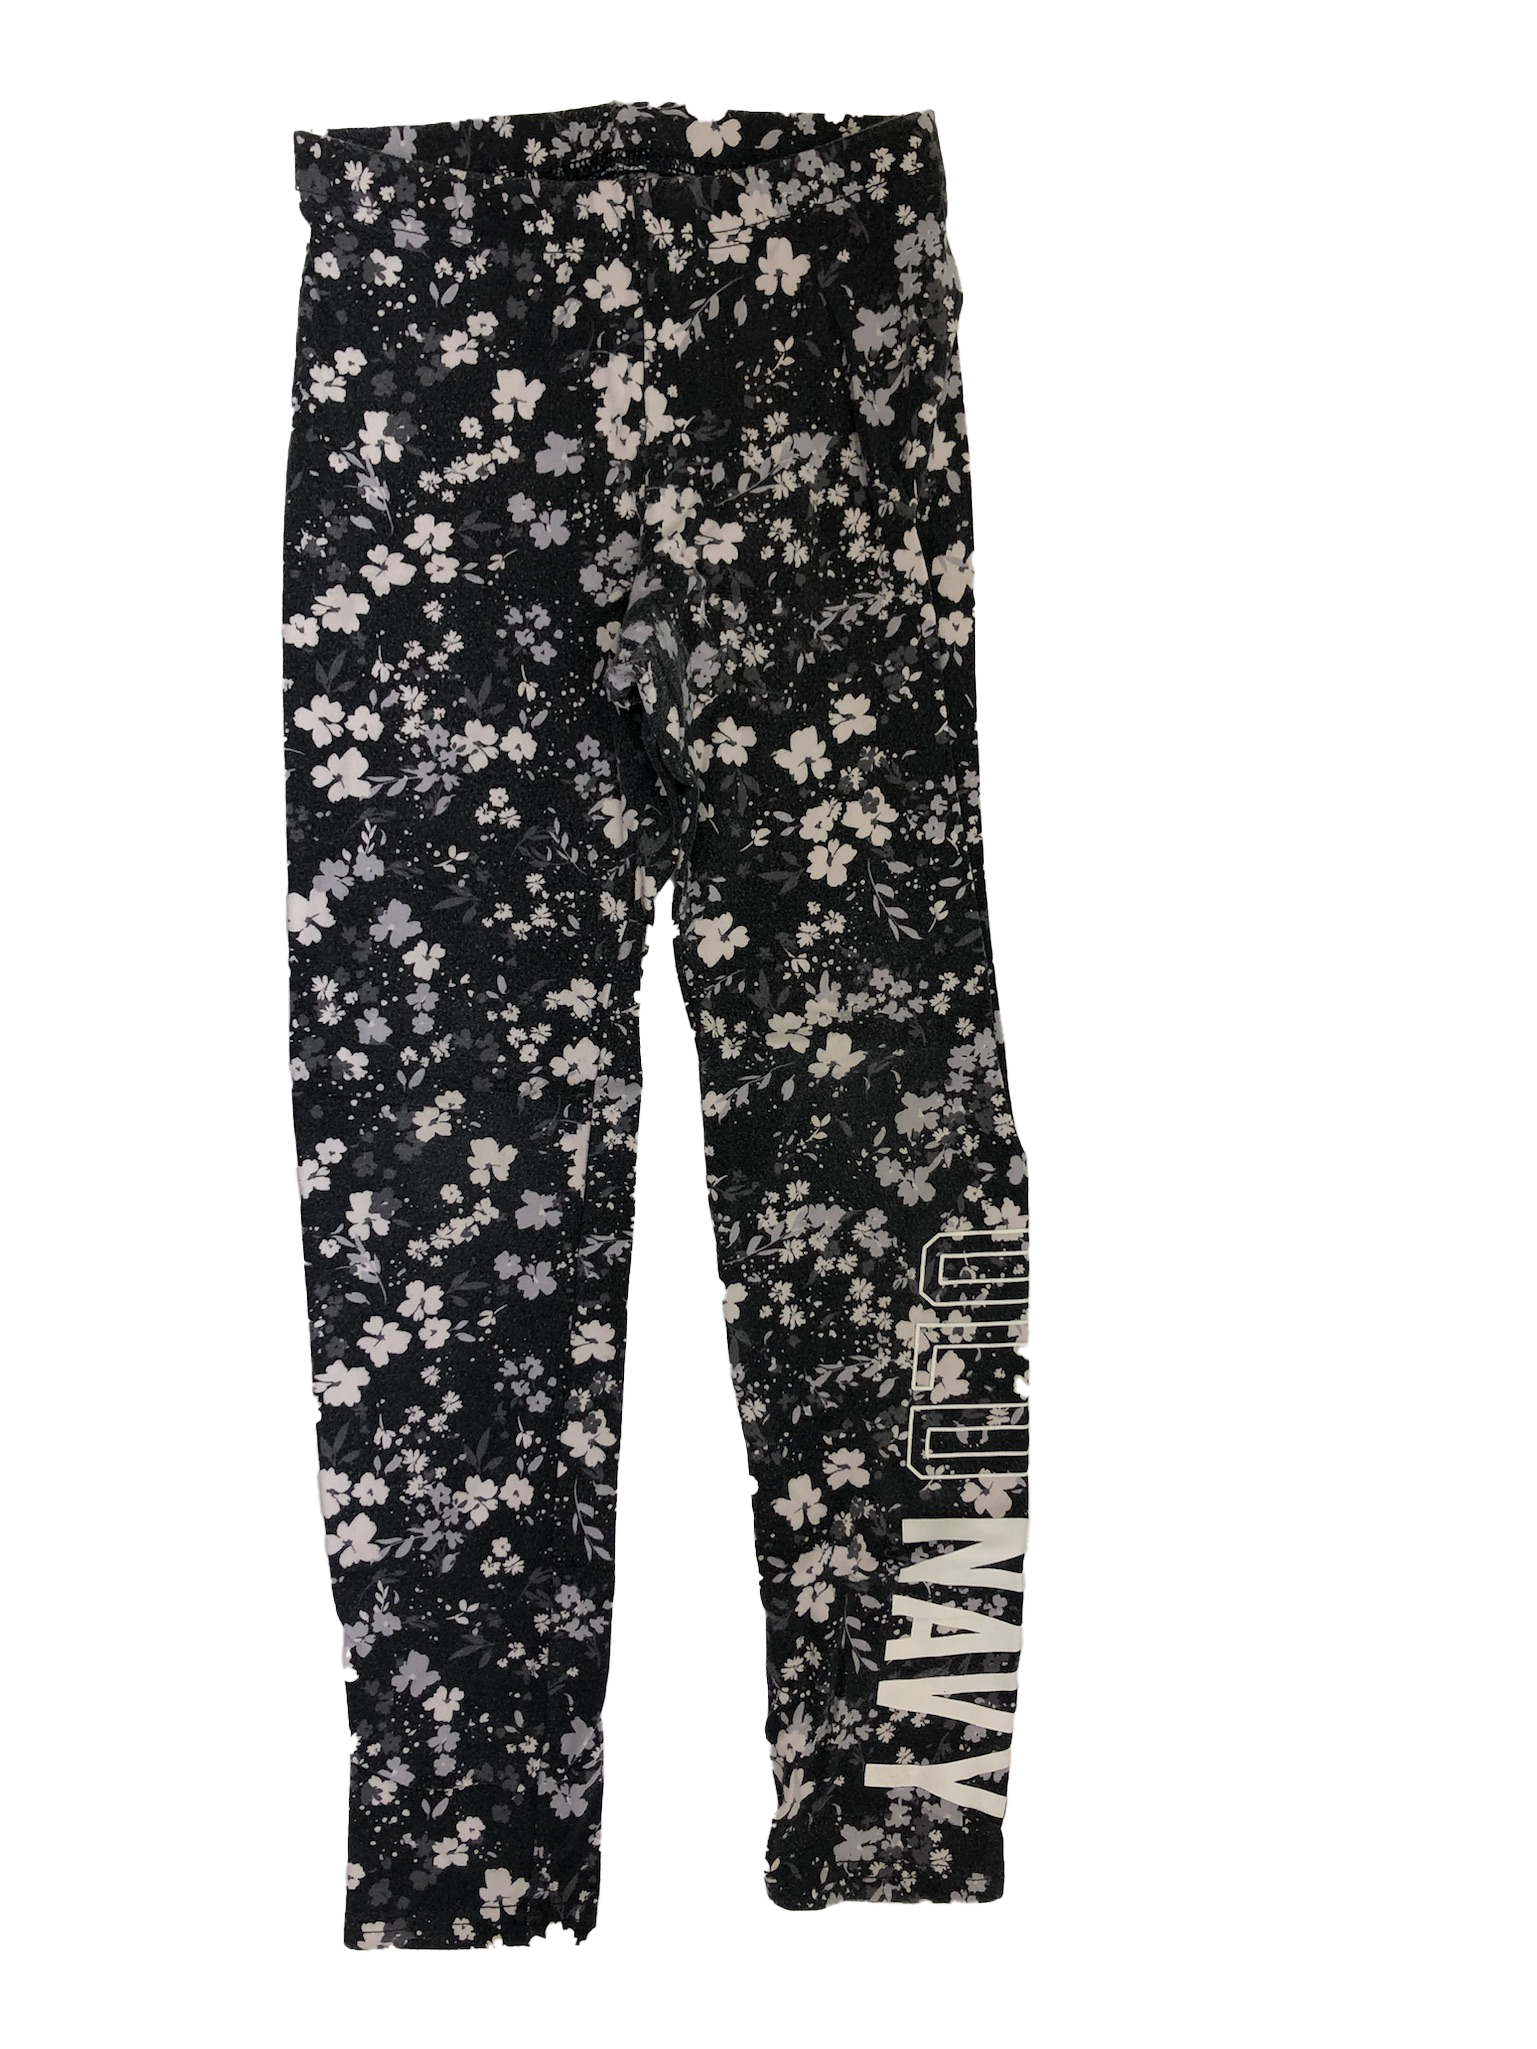 Old Navy Black Floral Leggings with Old Navy on Leg 8 – The